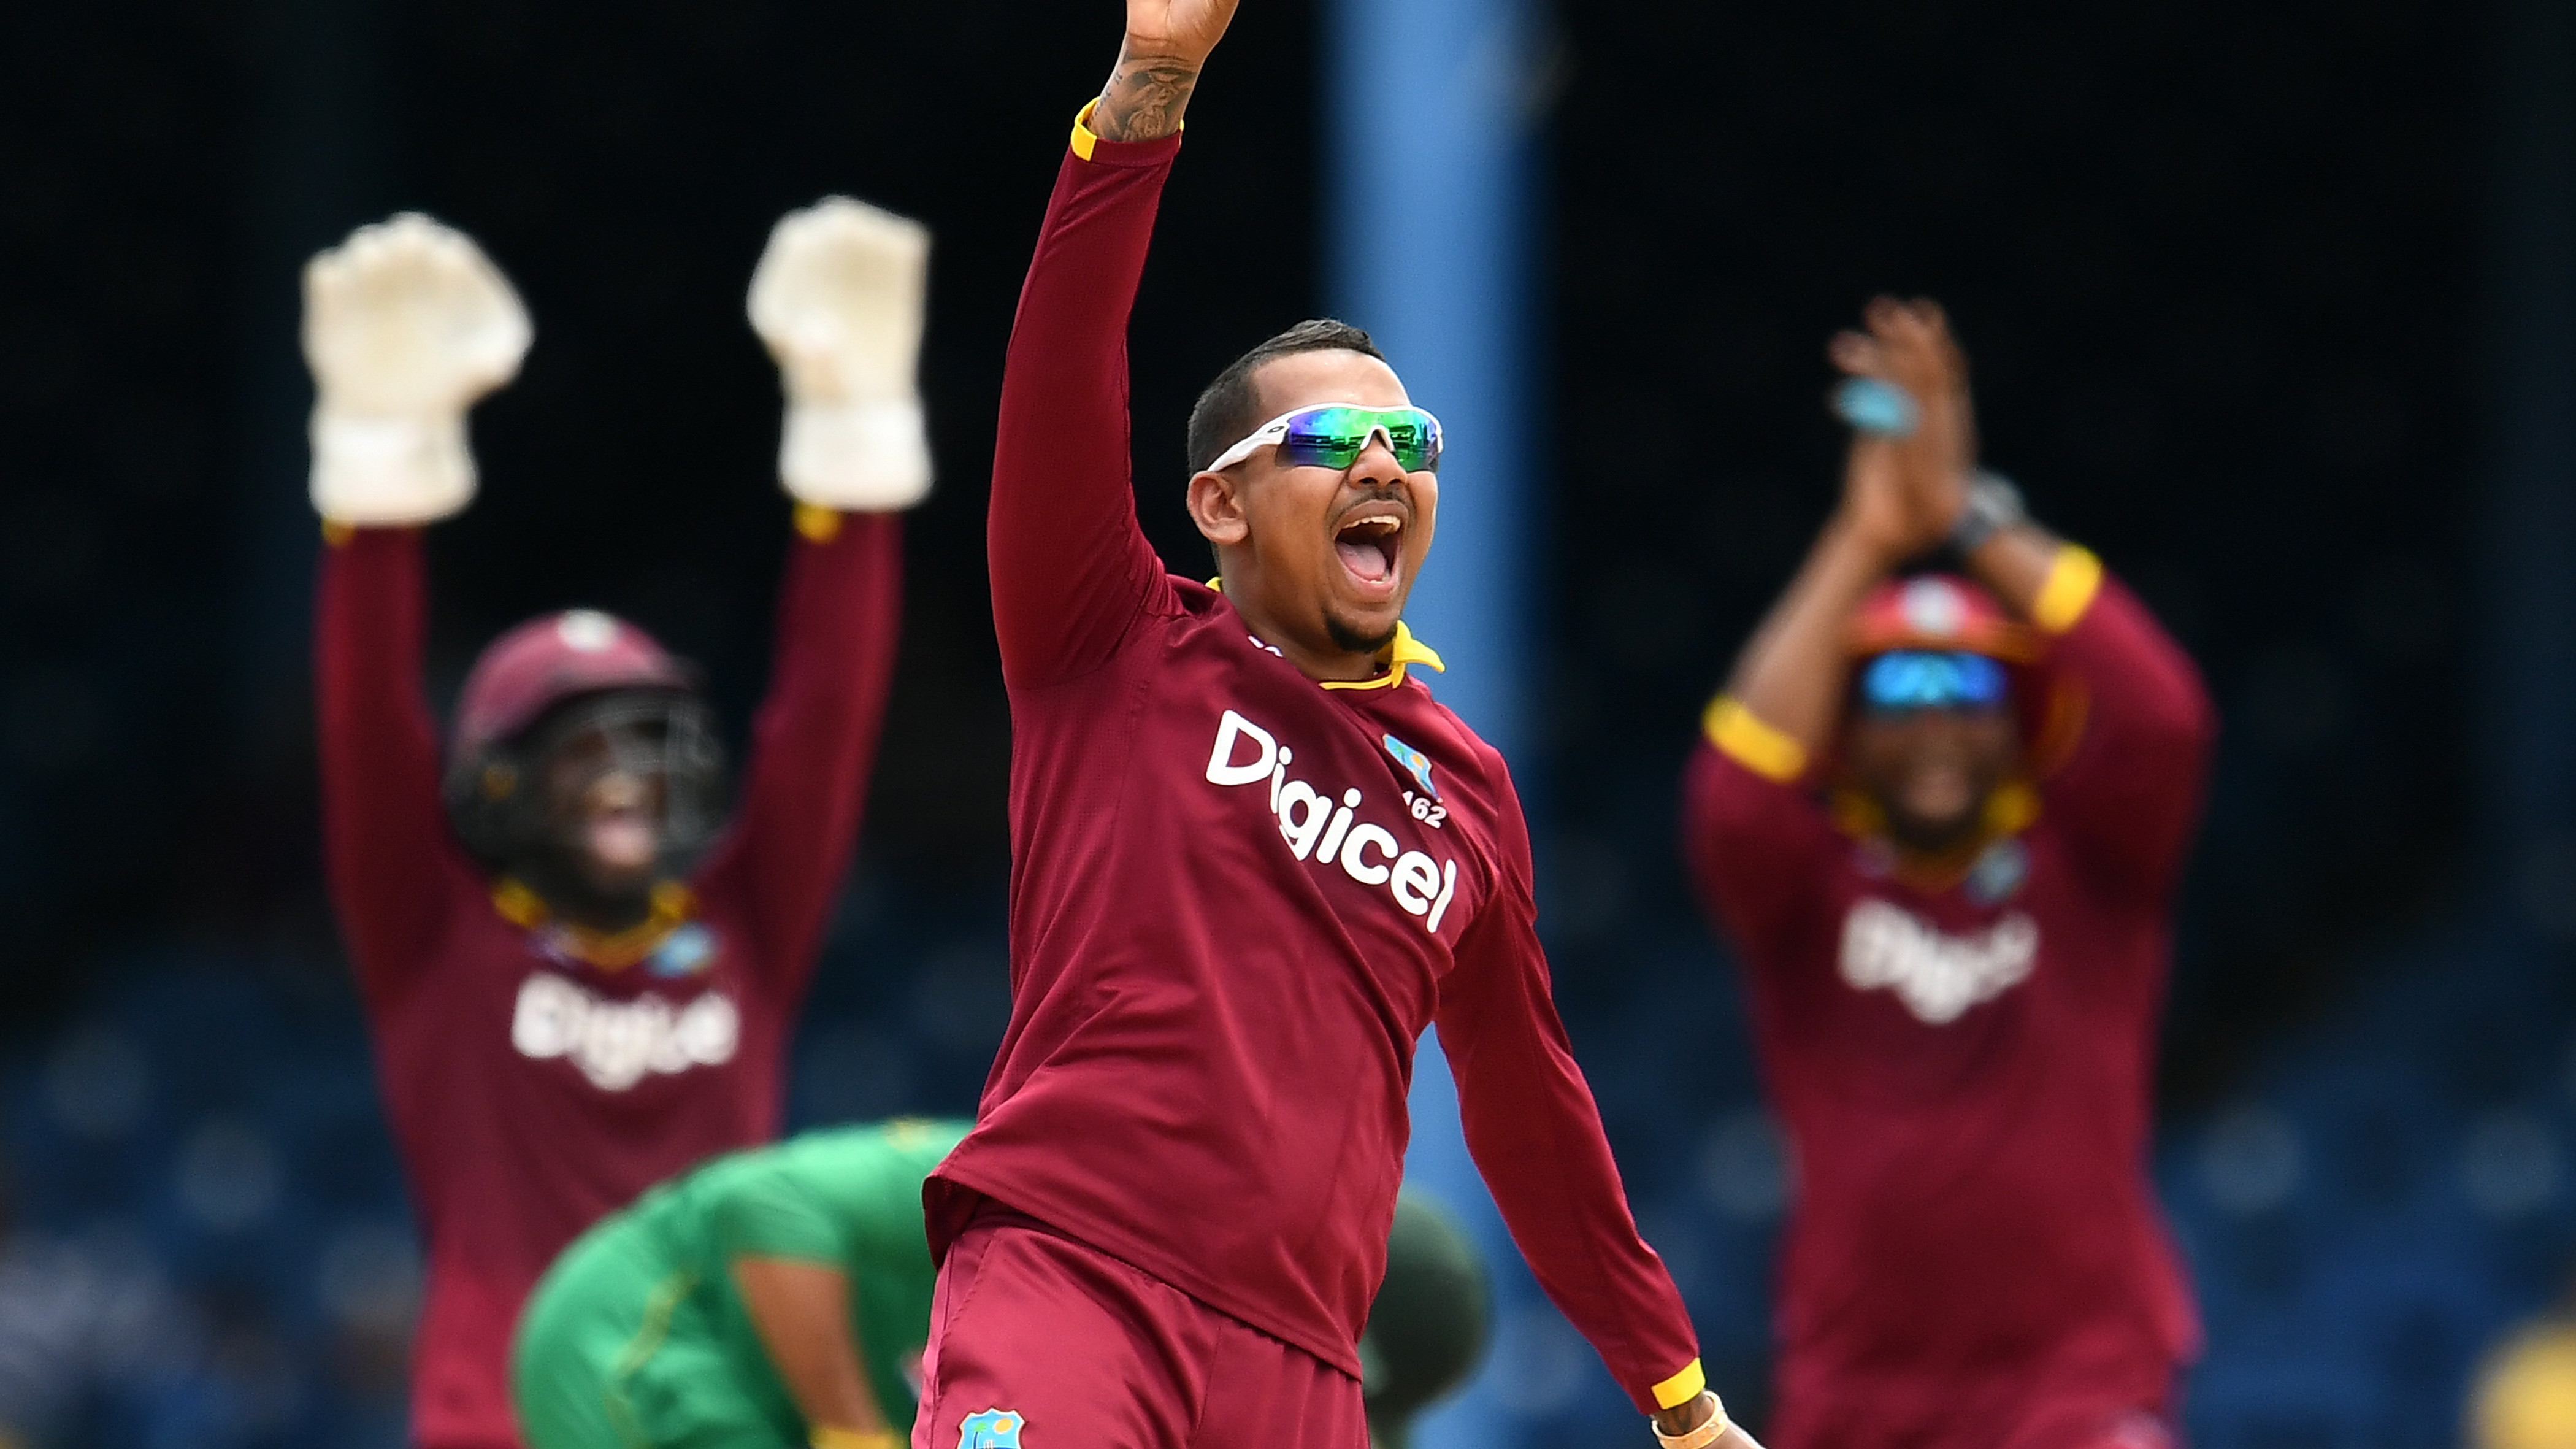 There's a lot of behind-the-scenes stuff going on, hopefully, I'll be wearing maroon again- Sunil Narine